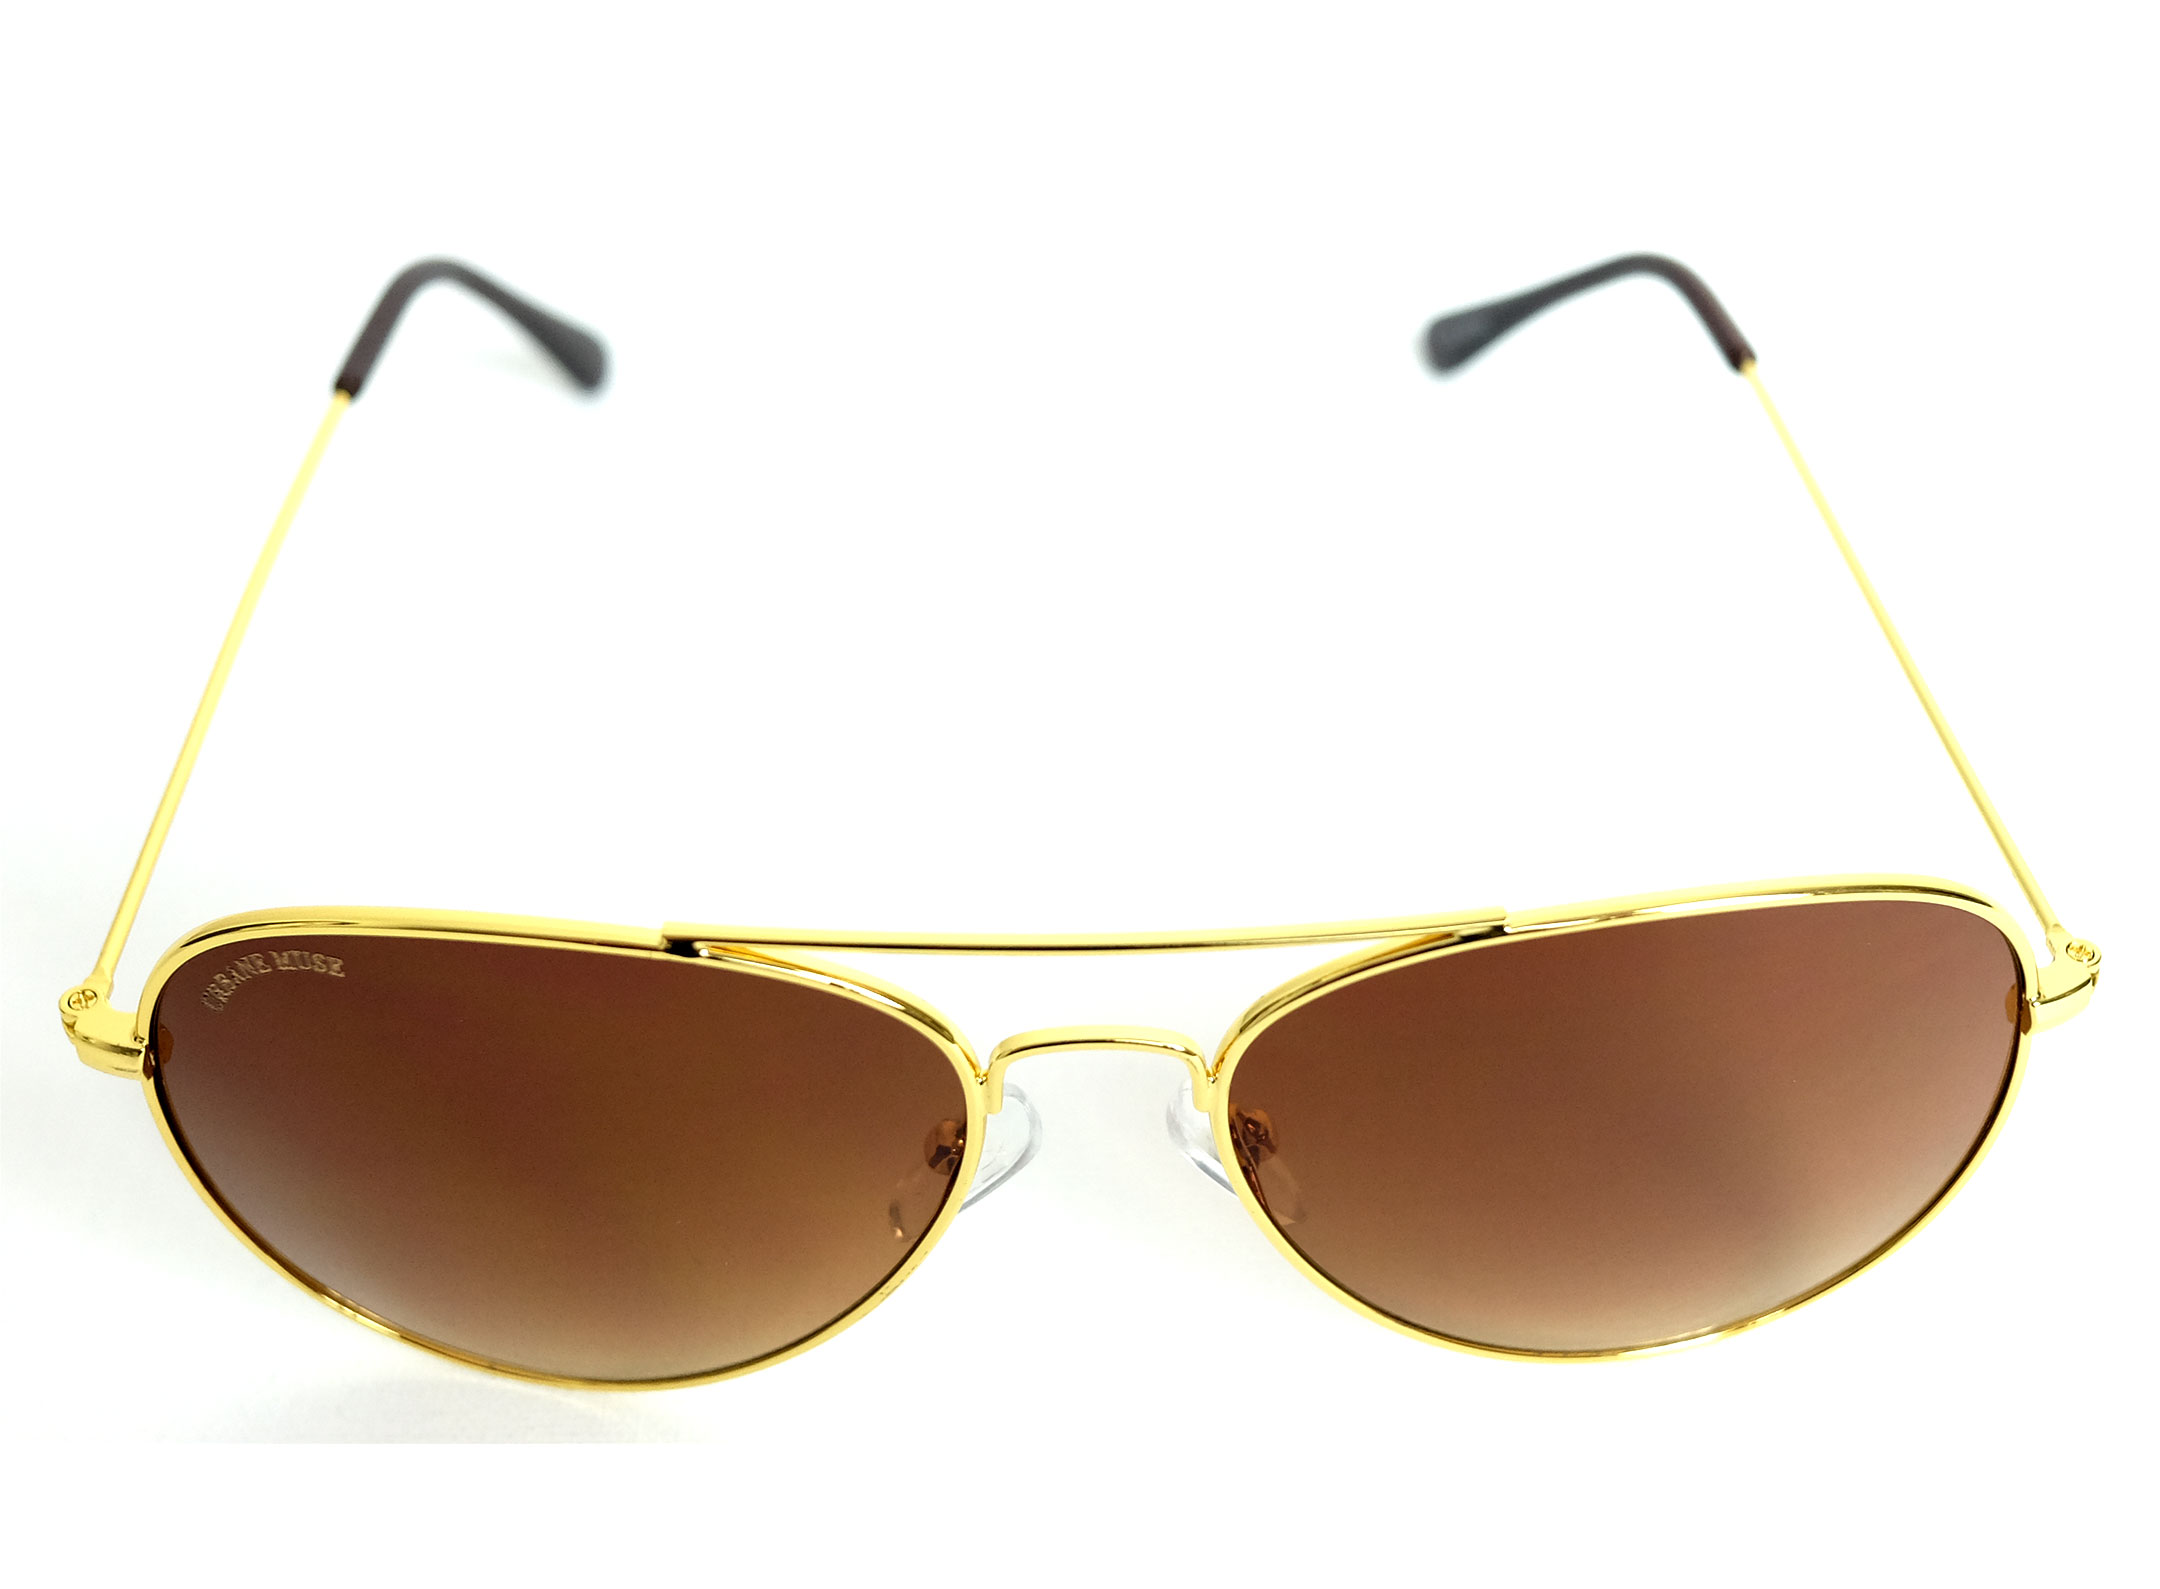 Round Aviator Sunglasses, Brown Lenses | Unisex Gold Metal Frame | Sustainable, Stainless Steel | 100% UV Protection 400